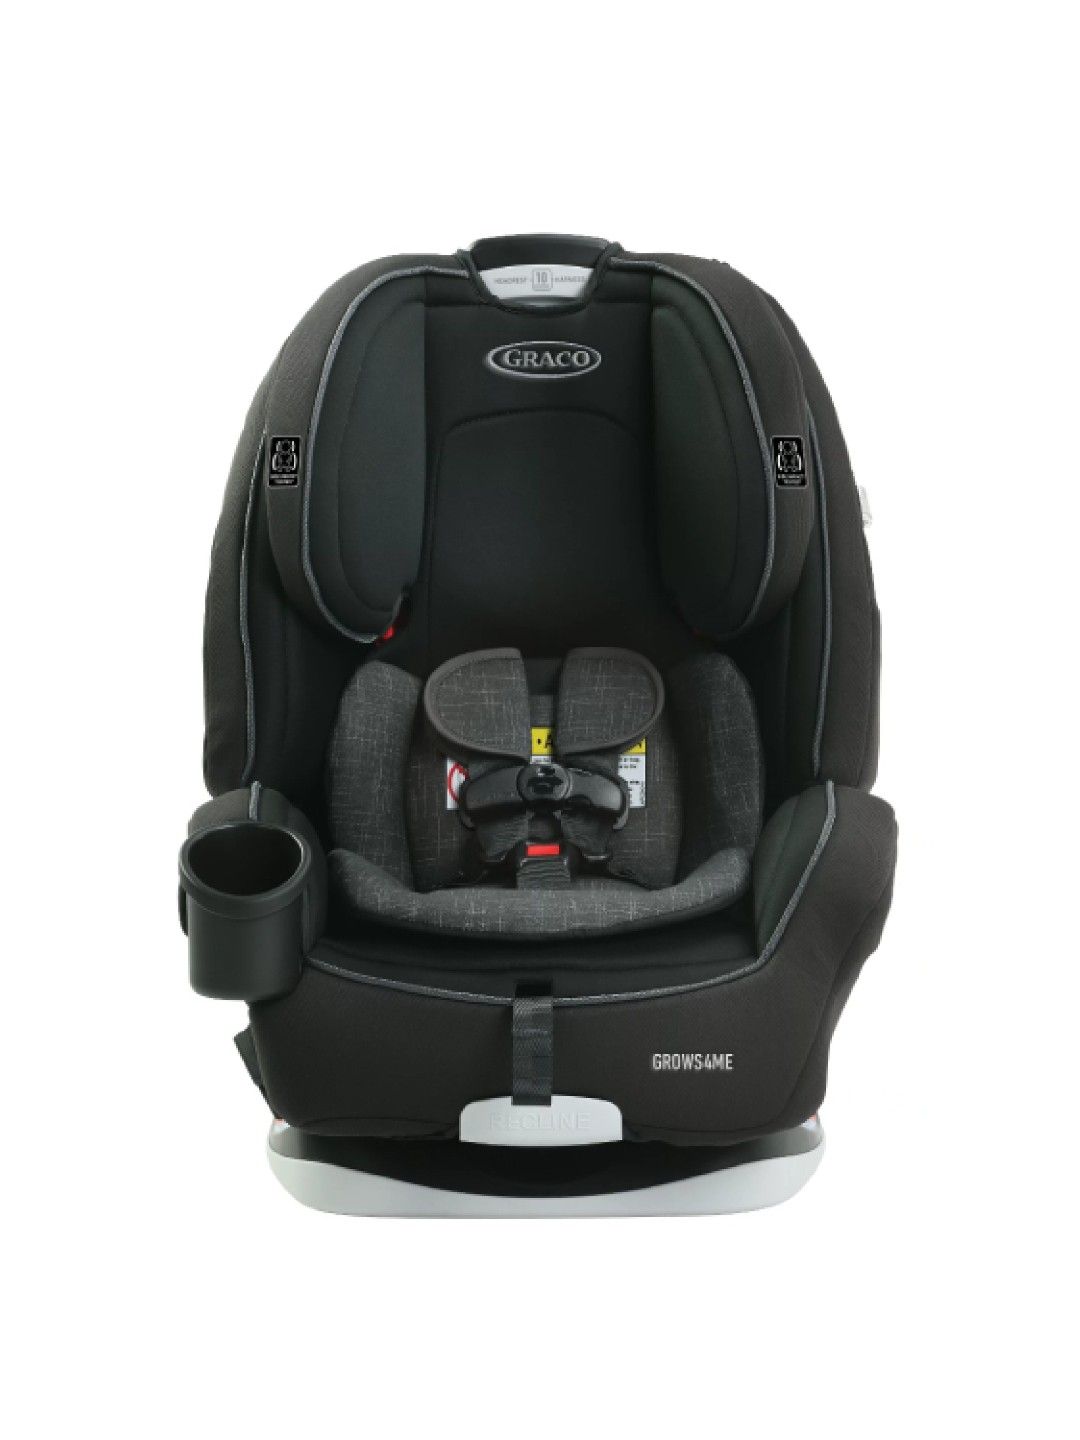 Graco Grows4Me 4-in-1 Car Seat West Point